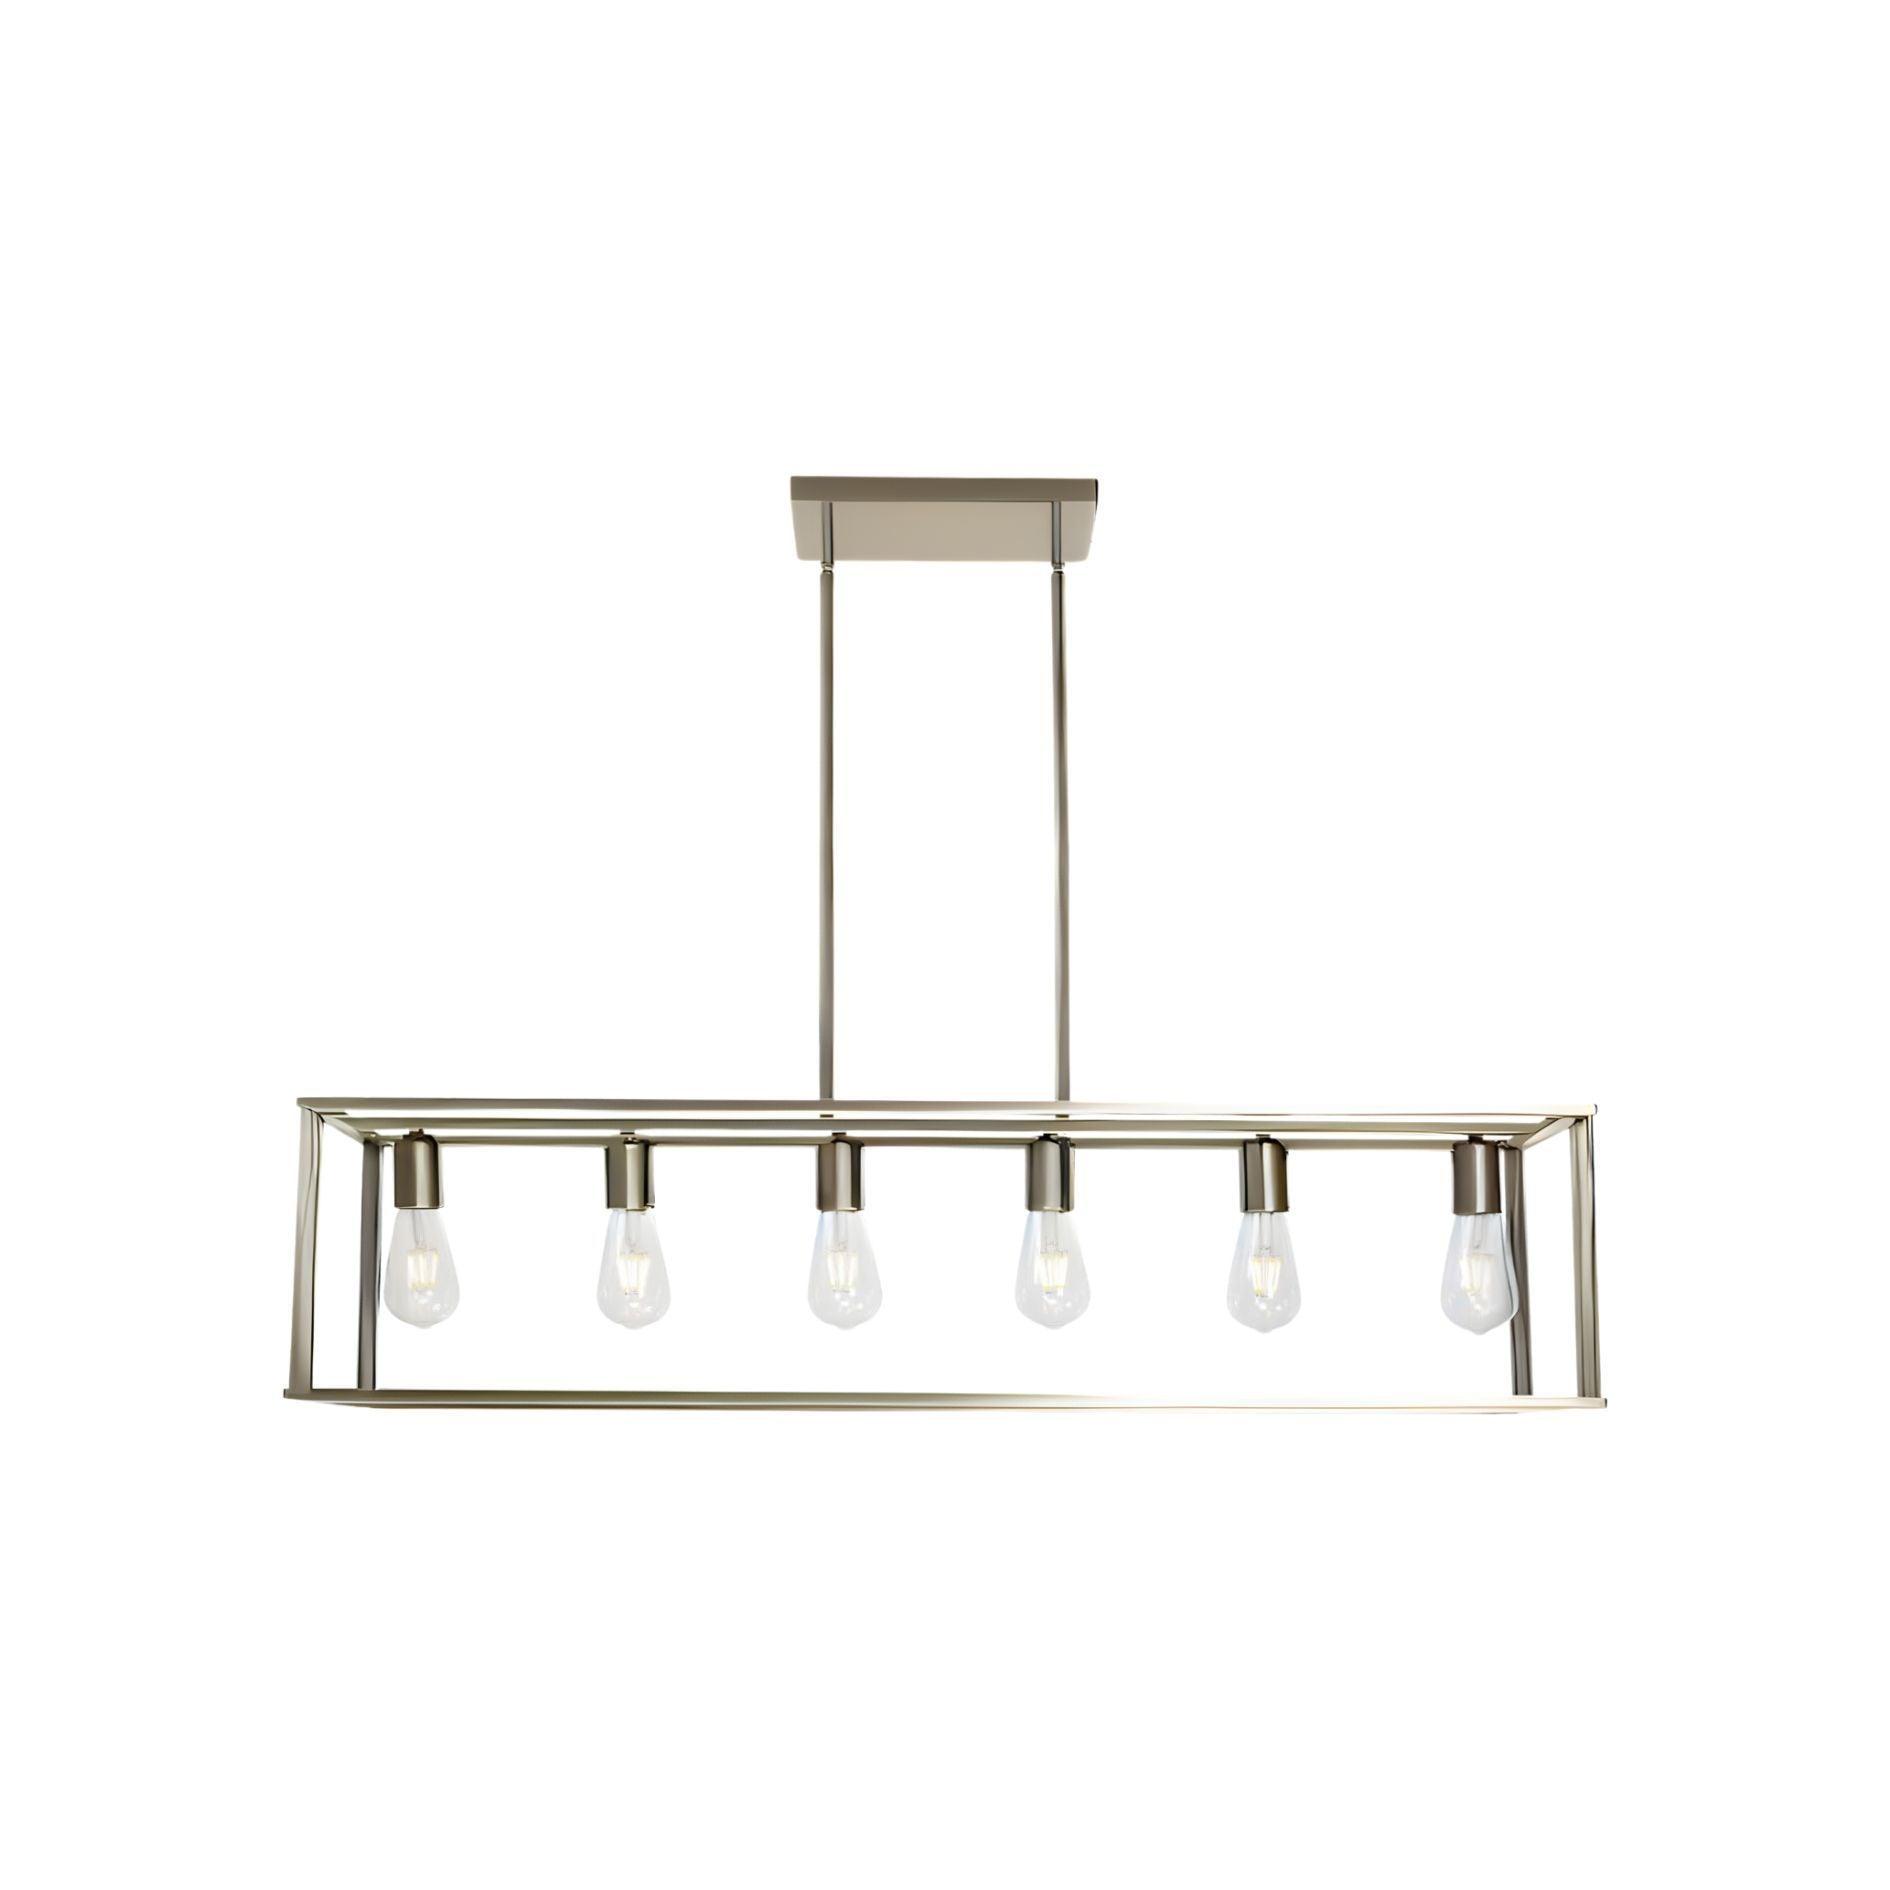 🆓🚛 6 Light Rectangle Chandelier Contemporary Farmhouse Linear Pendant Lighting Brushed Nickel Industrial Vintage Kitchen Island Metal Cage Ceiling Light Fixture